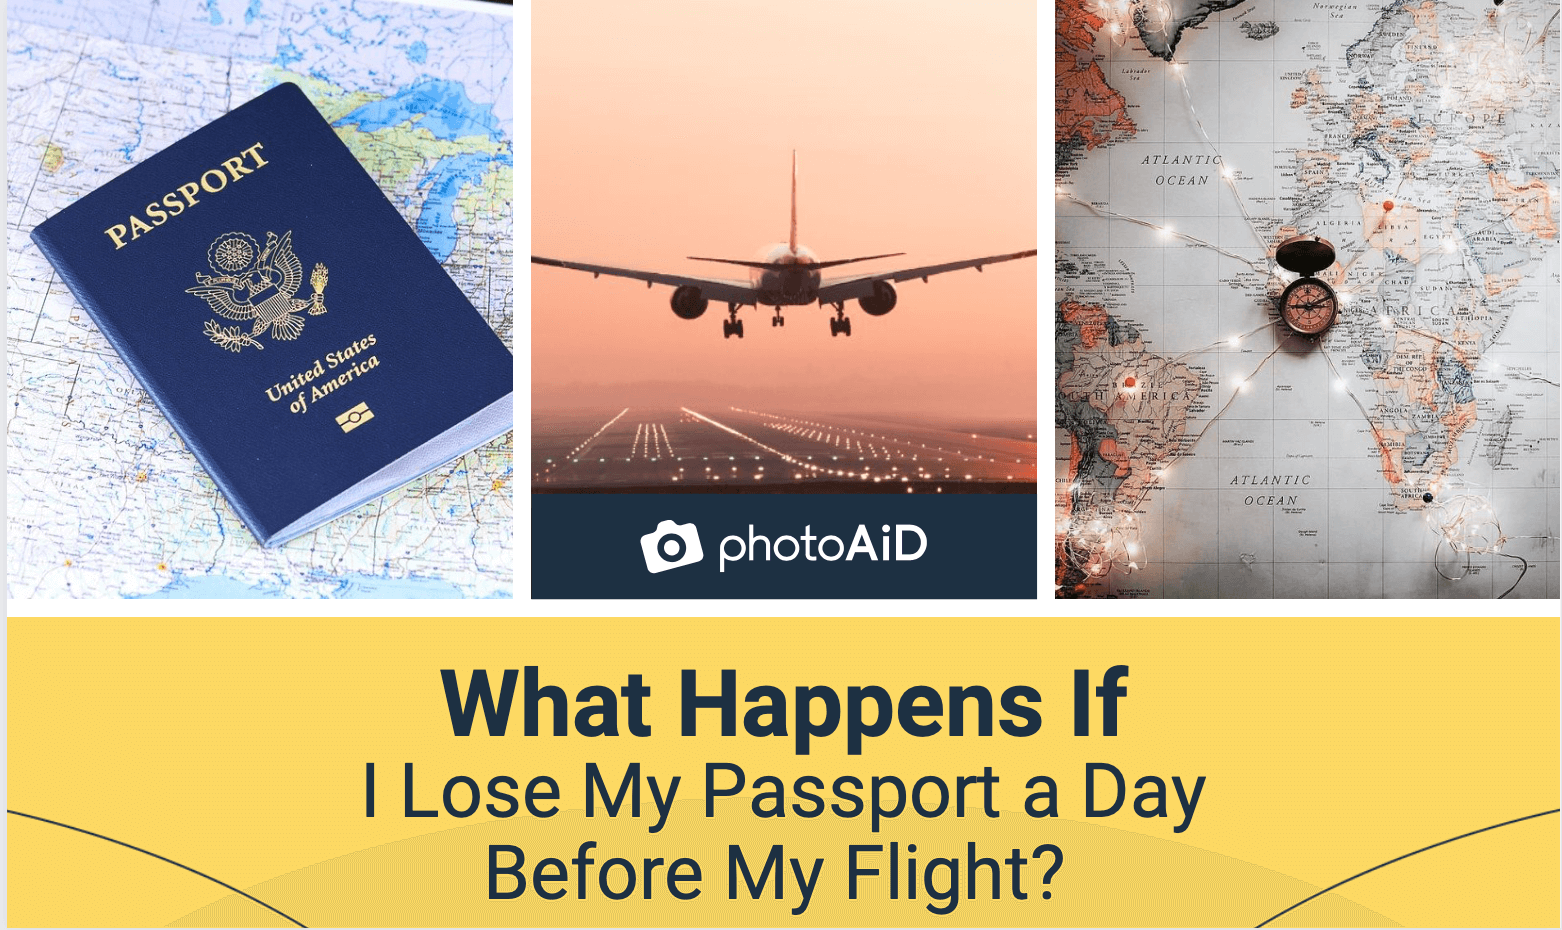 U.S. passport laying on a table; a plane landing; a compass on the world map; text: “What happens if I lose my passport a day before my flight?”